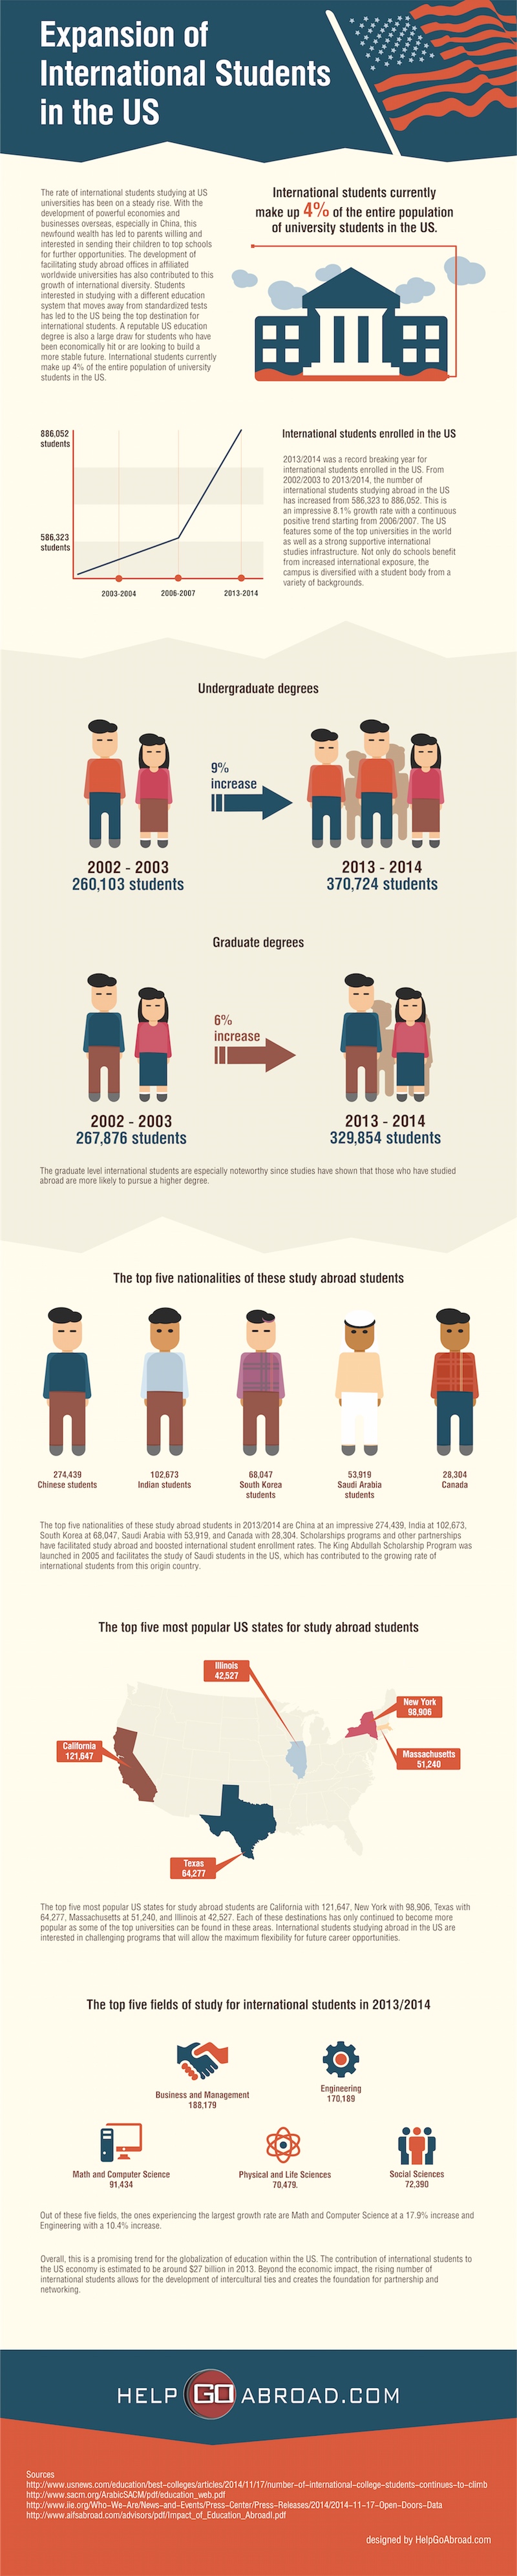 Infographic: Expansion of International Students in the US